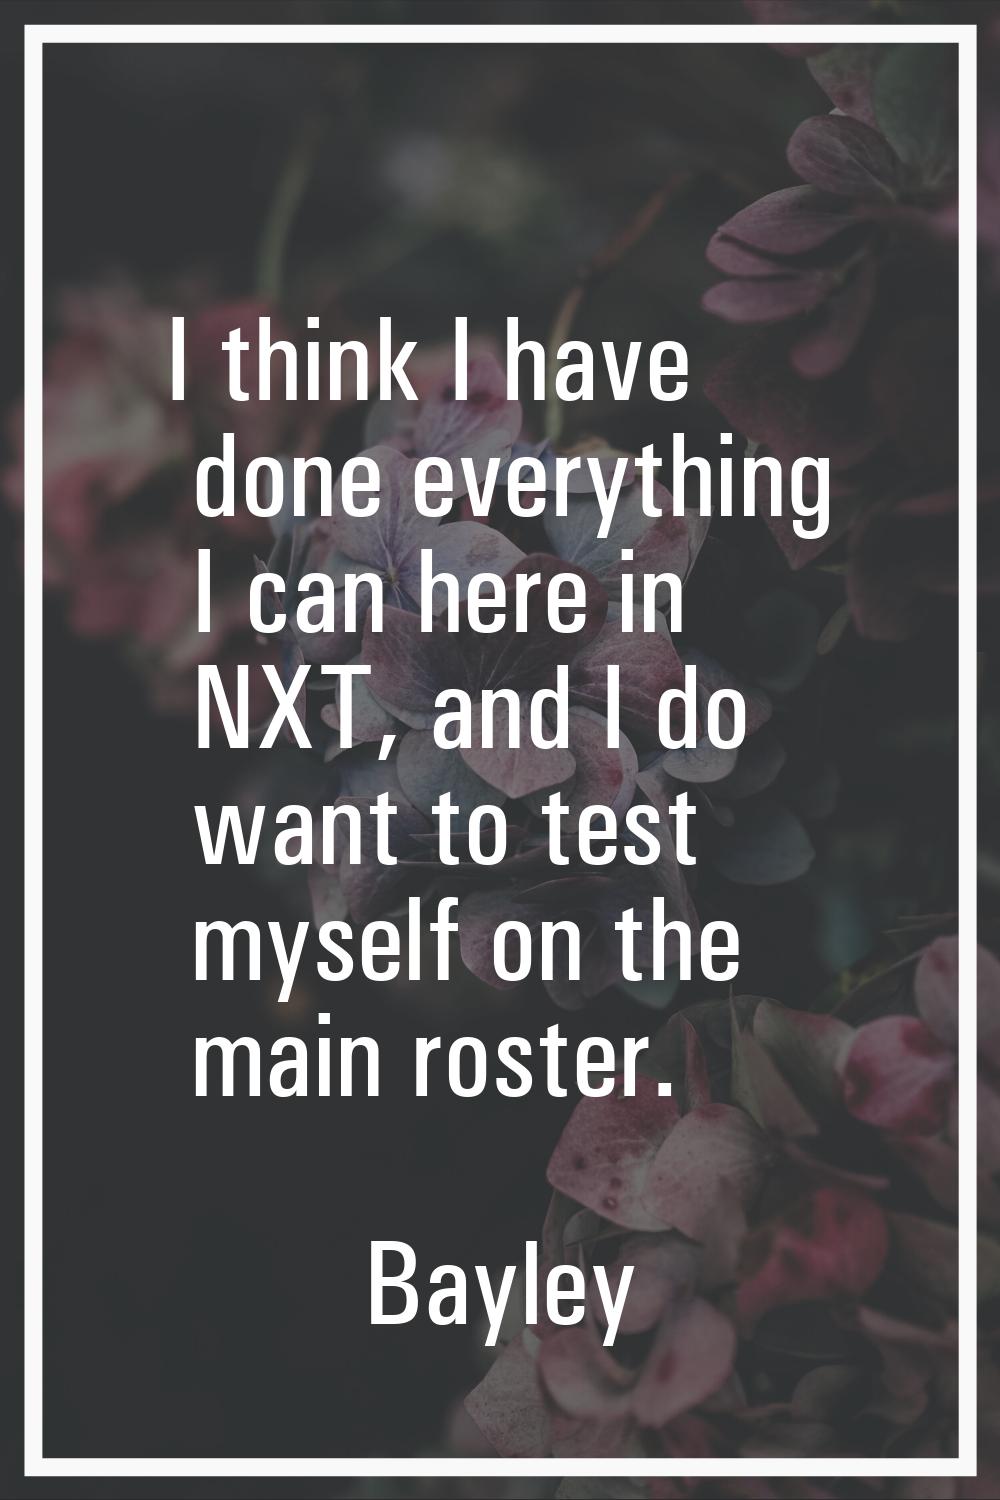 I think I have done everything I can here in NXT, and I do want to test myself on the main roster.